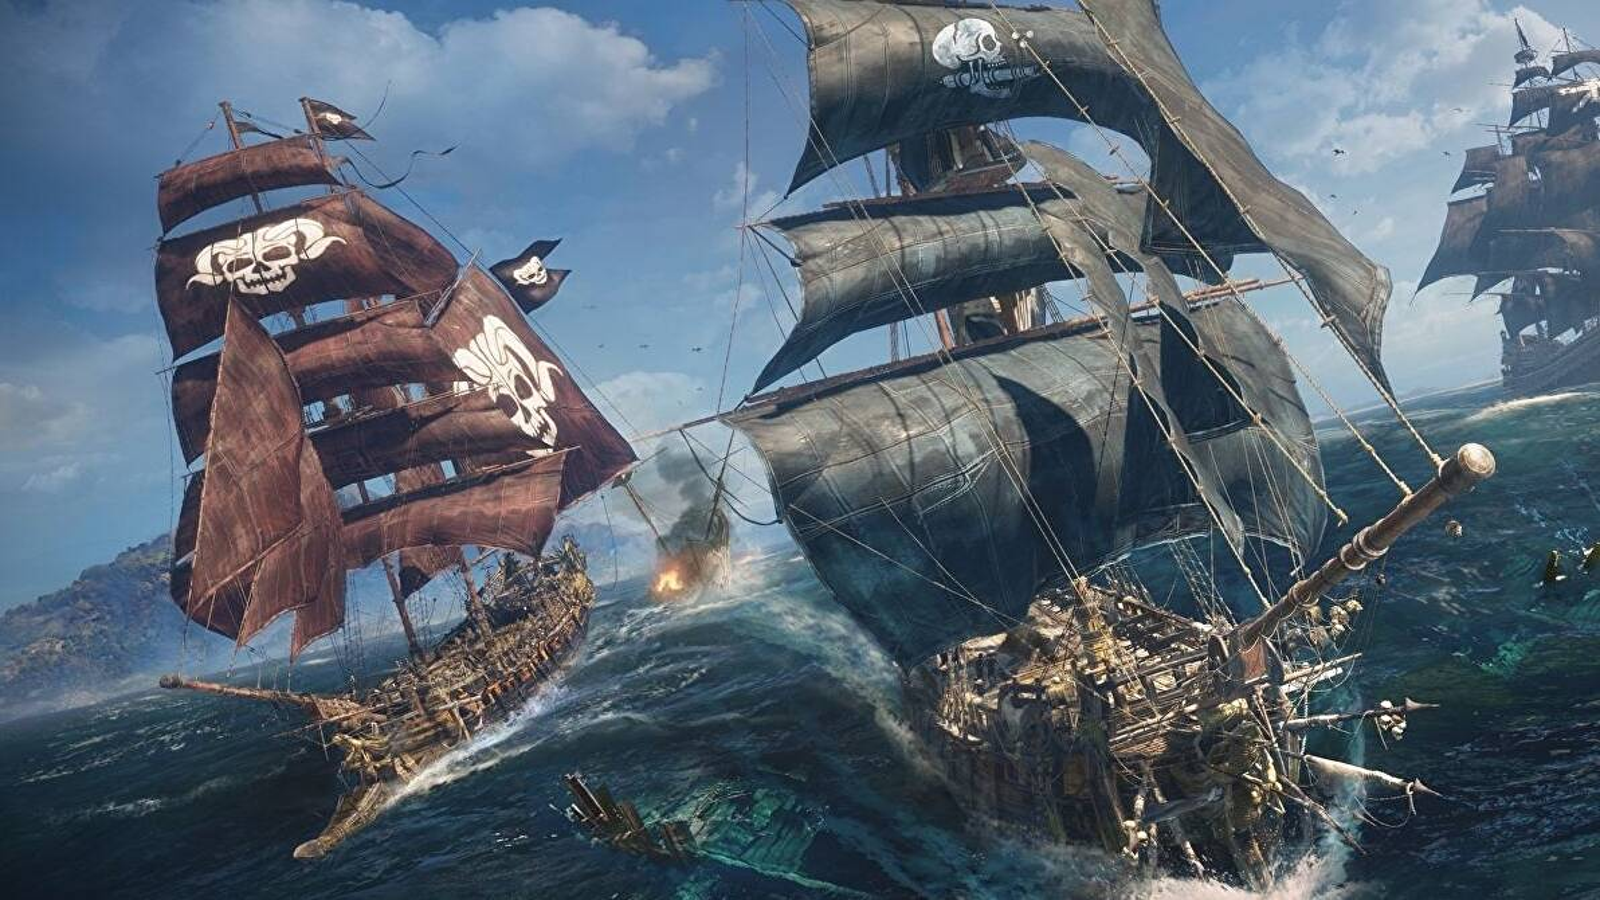 Skull & Bones Loses Its Third Creative Director, No Release Date in Sight